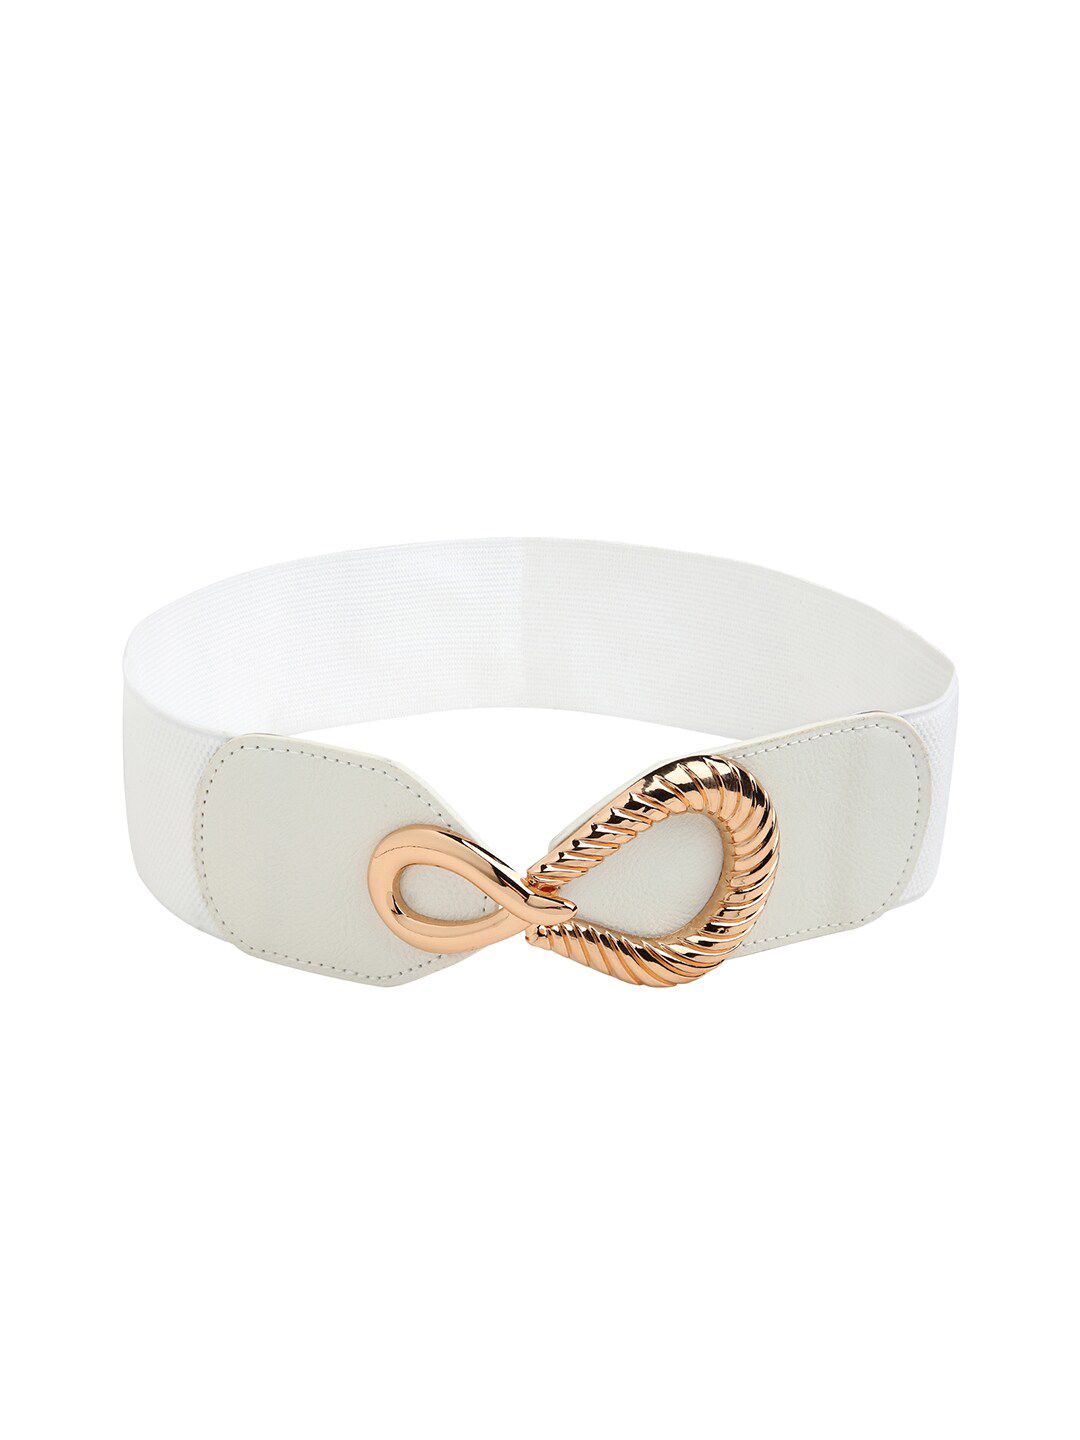 CRUSSET Women White Textured Belt with Embellished Closure Price in India